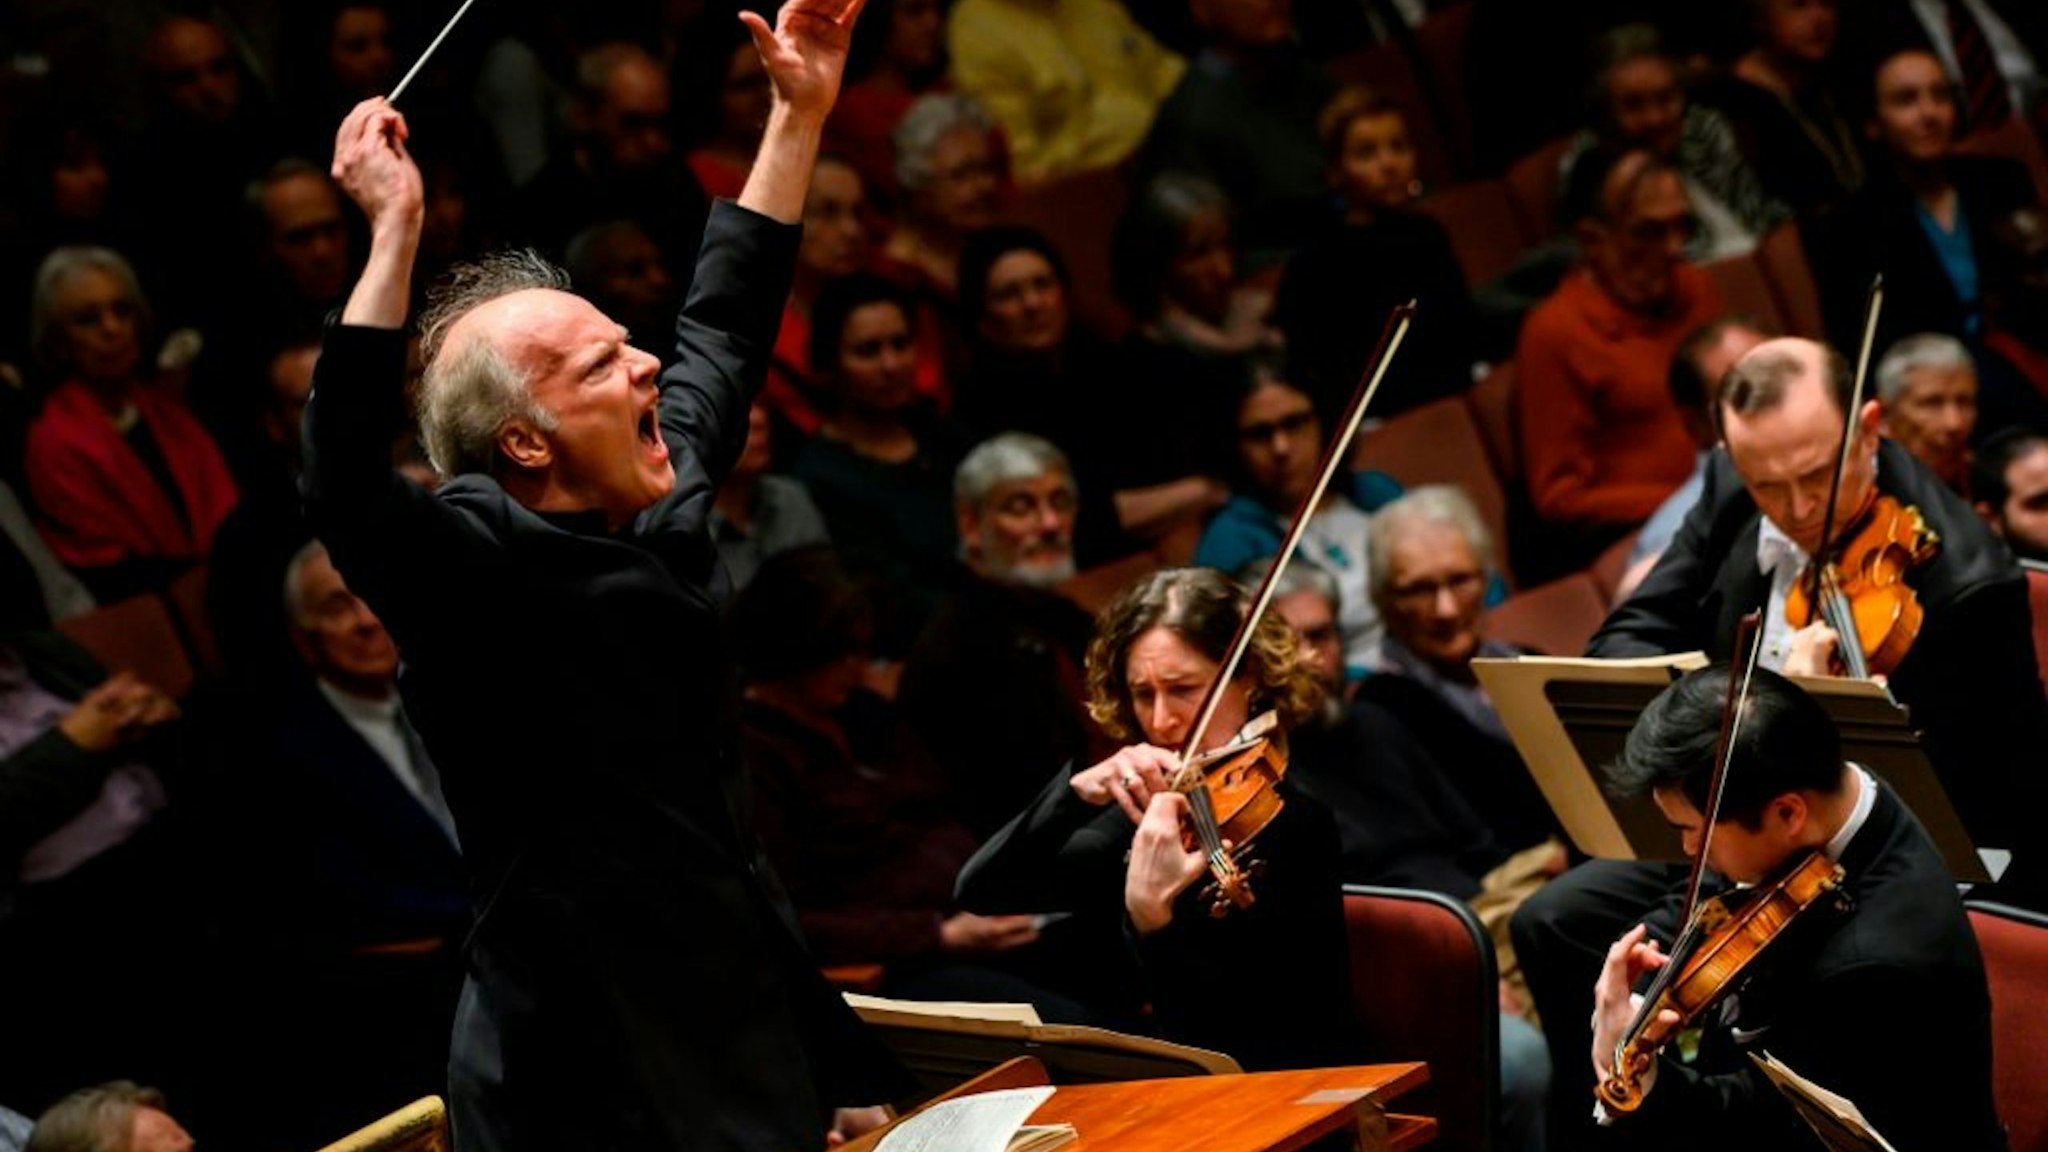 Italian conductor Gianandrea Noseda conducts the National Symphony Orchestra (NSO) during a concert at the John F. Kennedy Center for the Performing Arts in Washington DC, on February 14, 2019. - In the concert hall, the sound is crisp, slicing through the air like a sharp knife. Gianandrea Noseda's baton is a divining rod that draws fresh energy from a once sluggish National Symphony Orchestra. He holds the promise of turning around the NSO much like he did with the Teatro Regio, a once relatively unknown provincial ensemble that became an internationally acclaimed one. The NSO, in turn, rewards Noseda with a foothold in the United Staees.